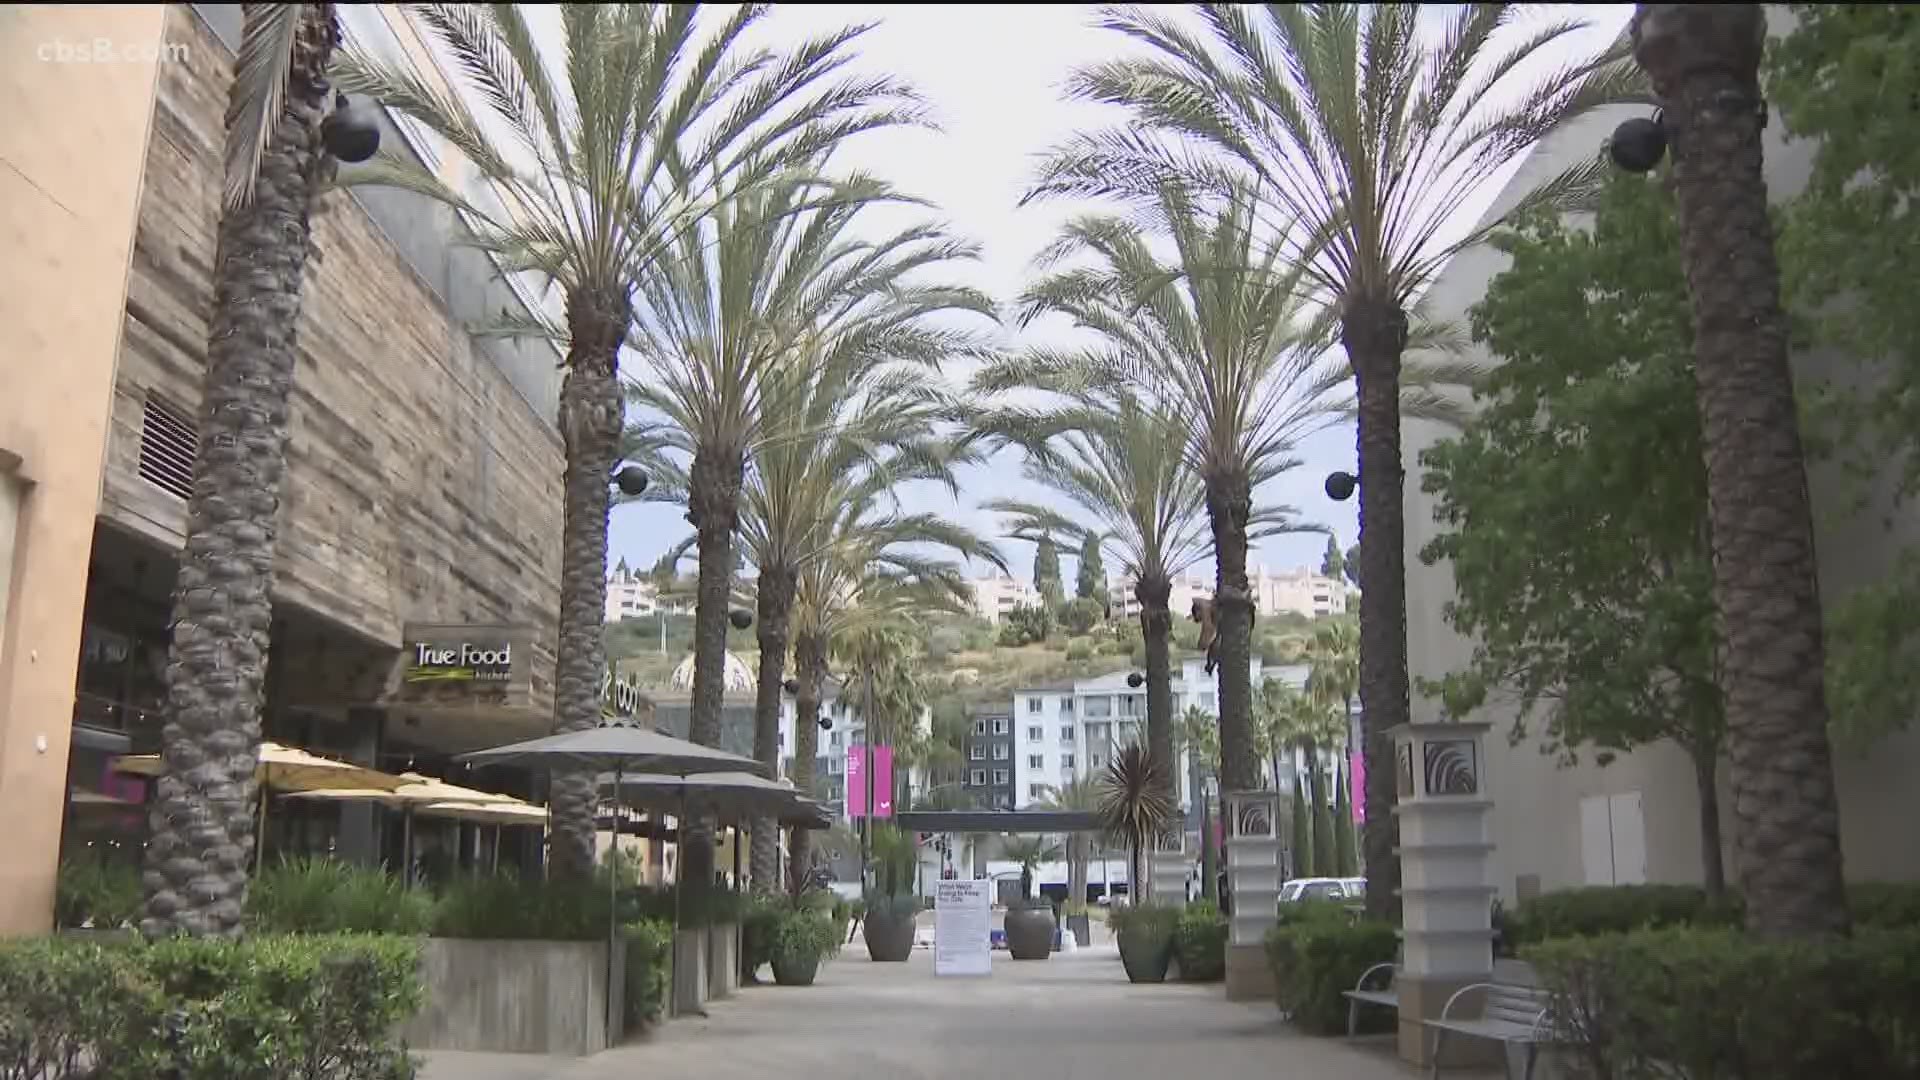 The upscale outdoor mall is the first major shopping center in San Diego to reopen after the county approved a plan allowing restaurants and retail shops to open.